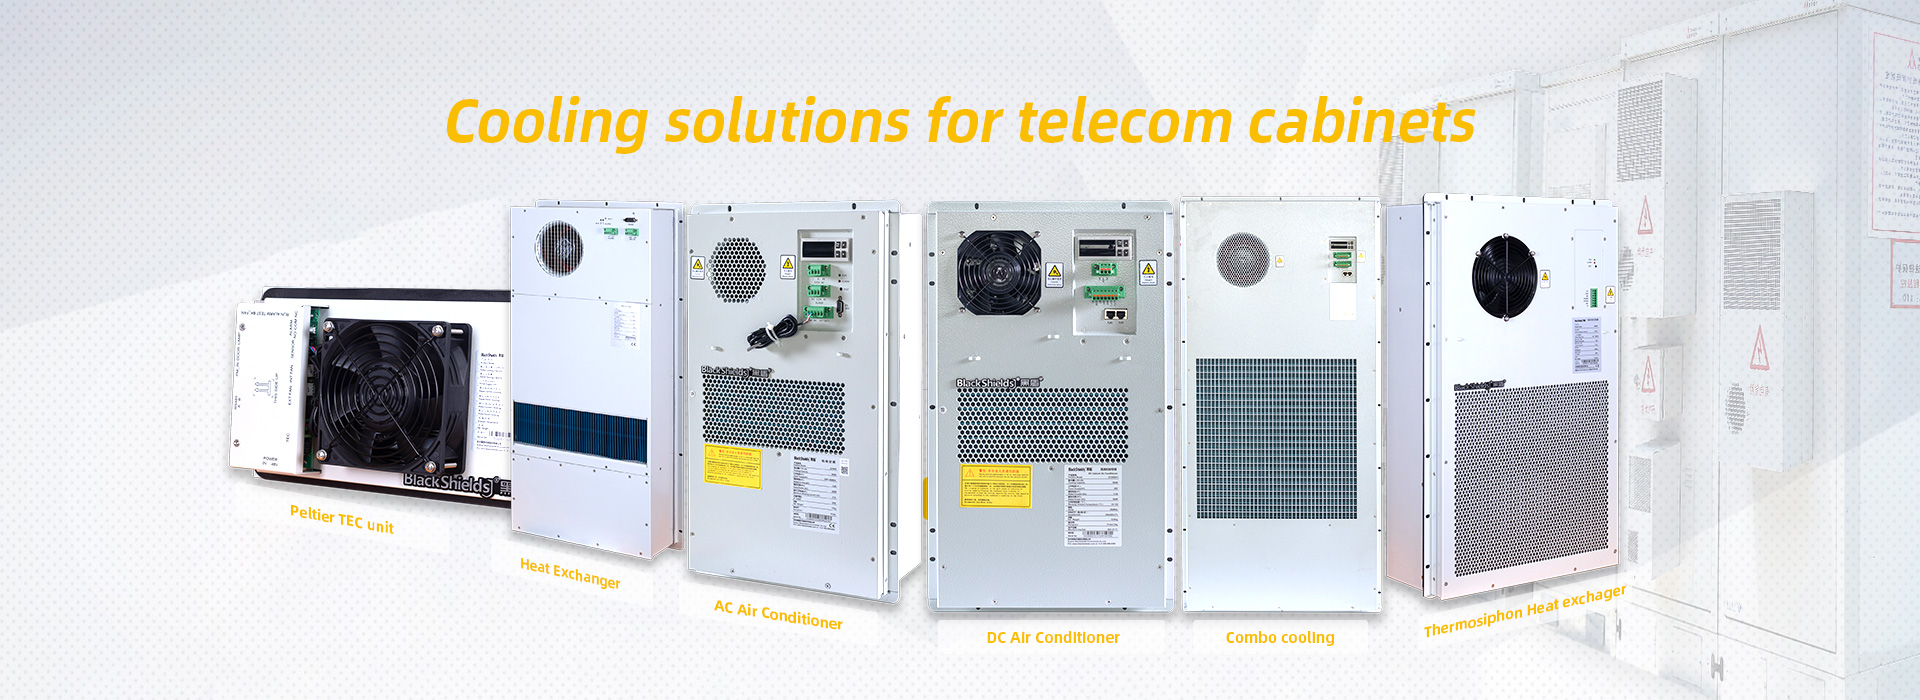 Cooling solutions for telecom cabinets